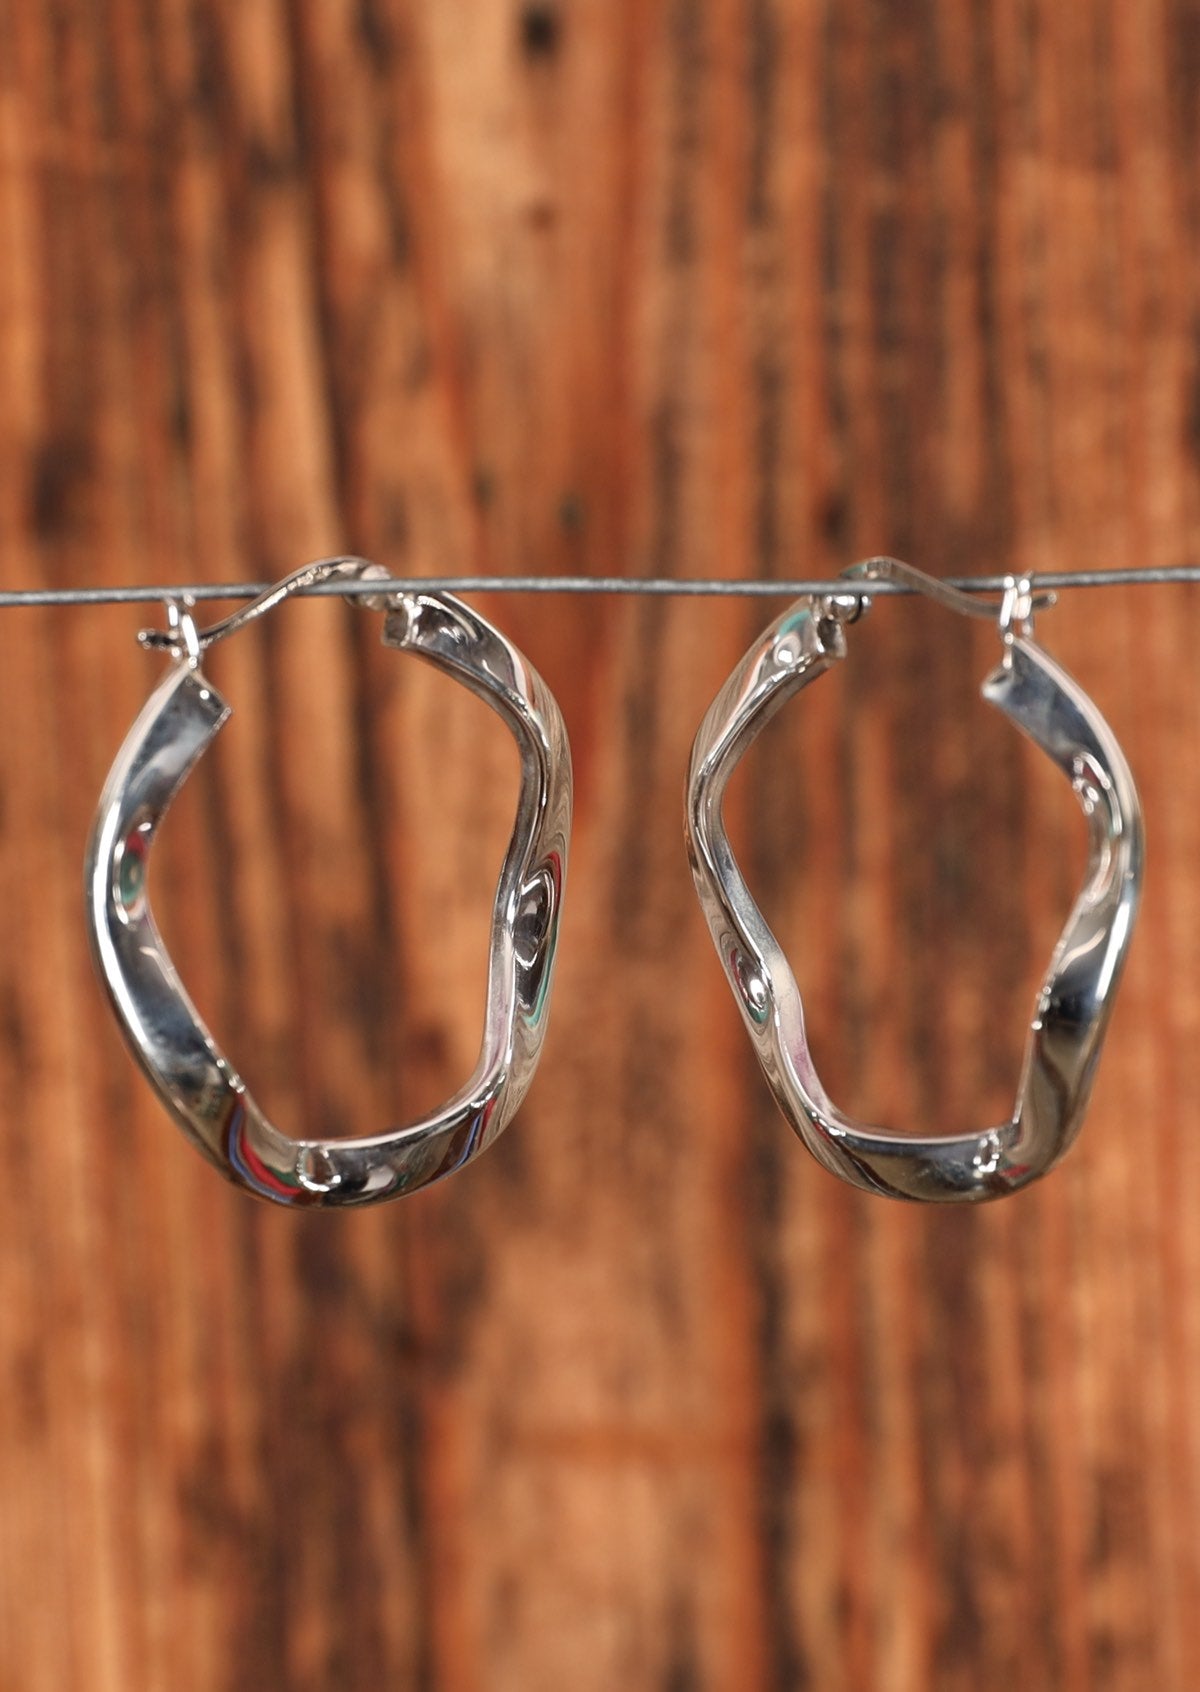 92.5% silver wavy hoops hanging on a wire for display.